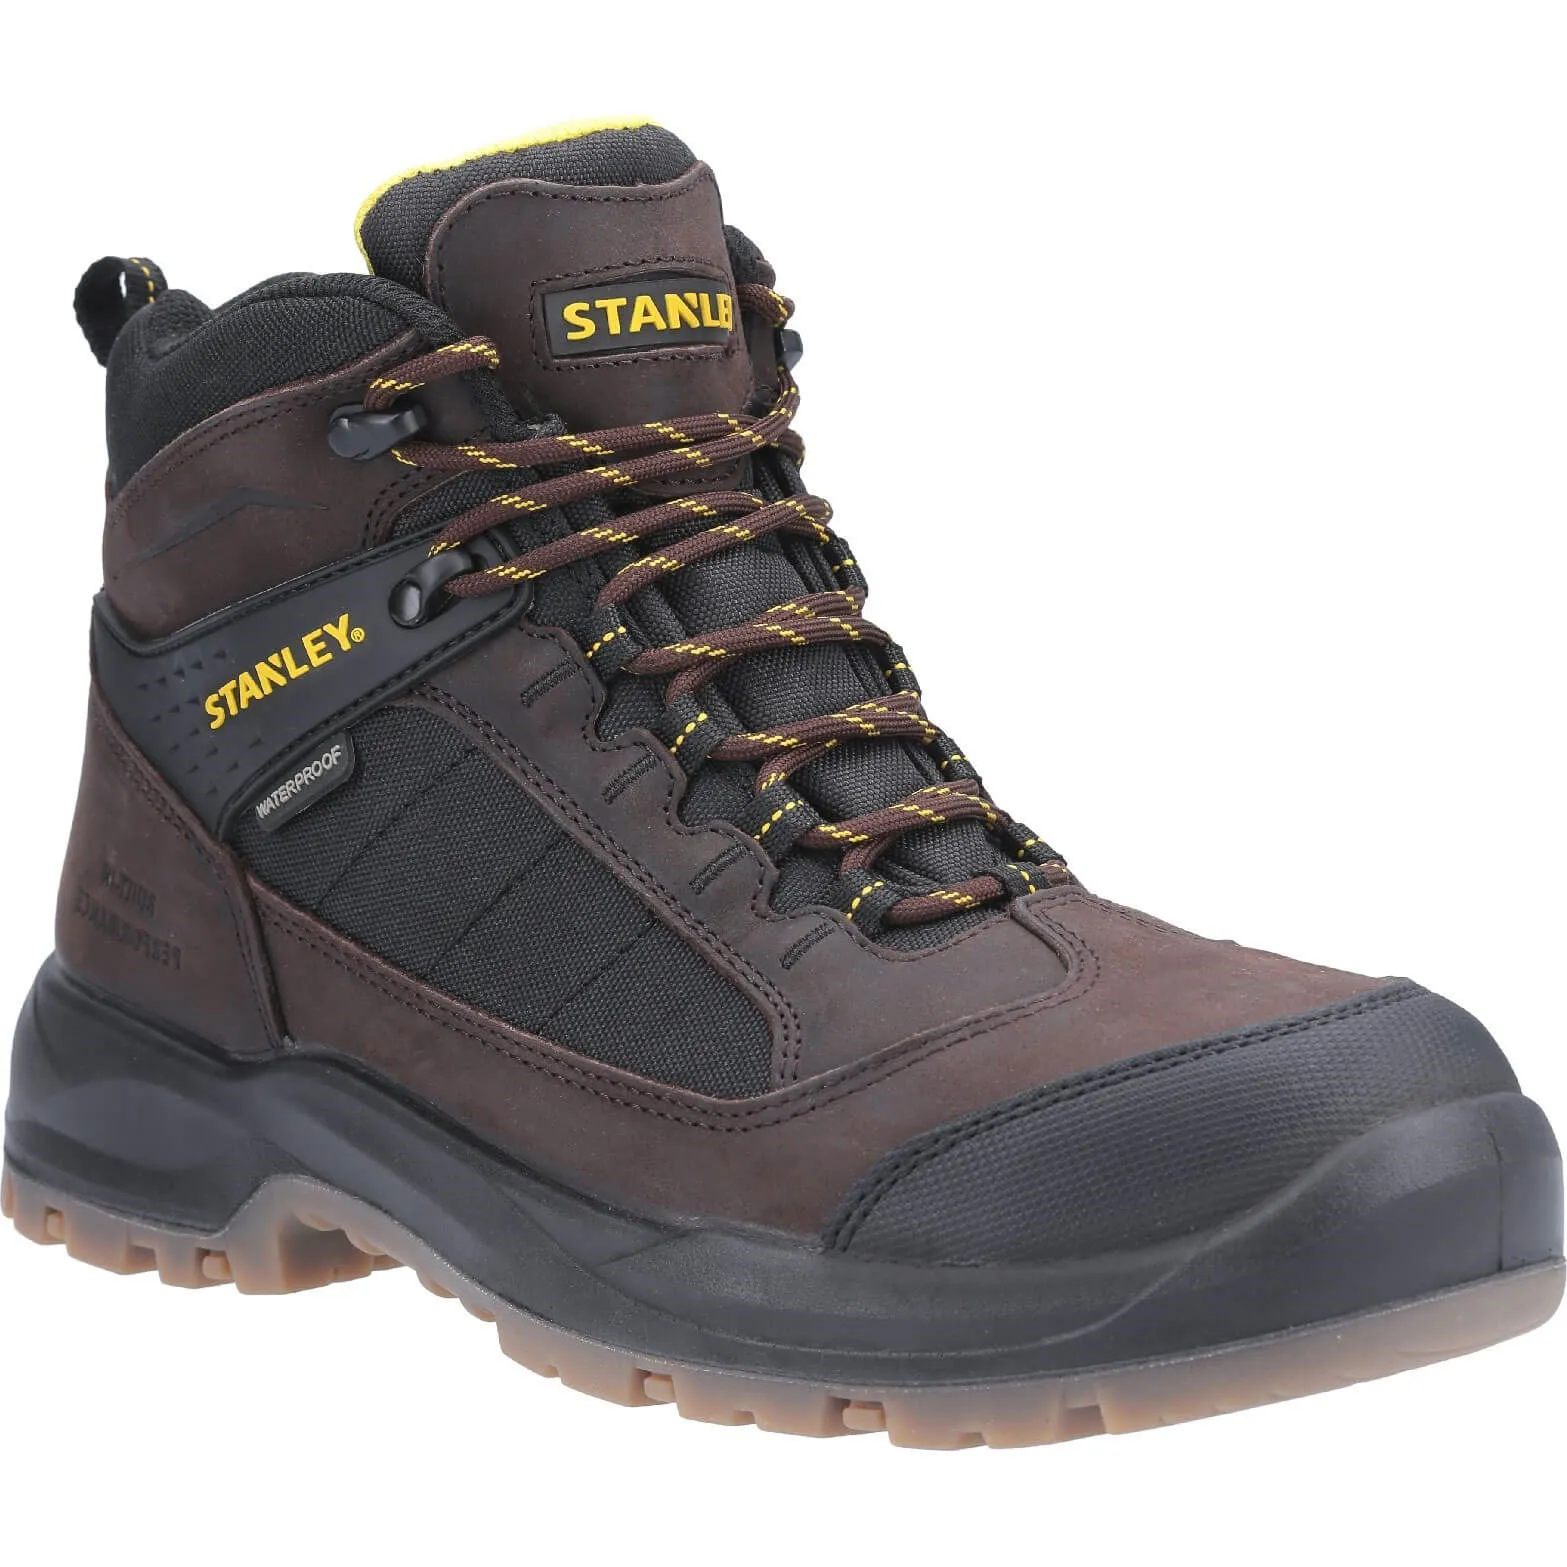 Stanley Berkeley Safety Boot - Brown, Size 11